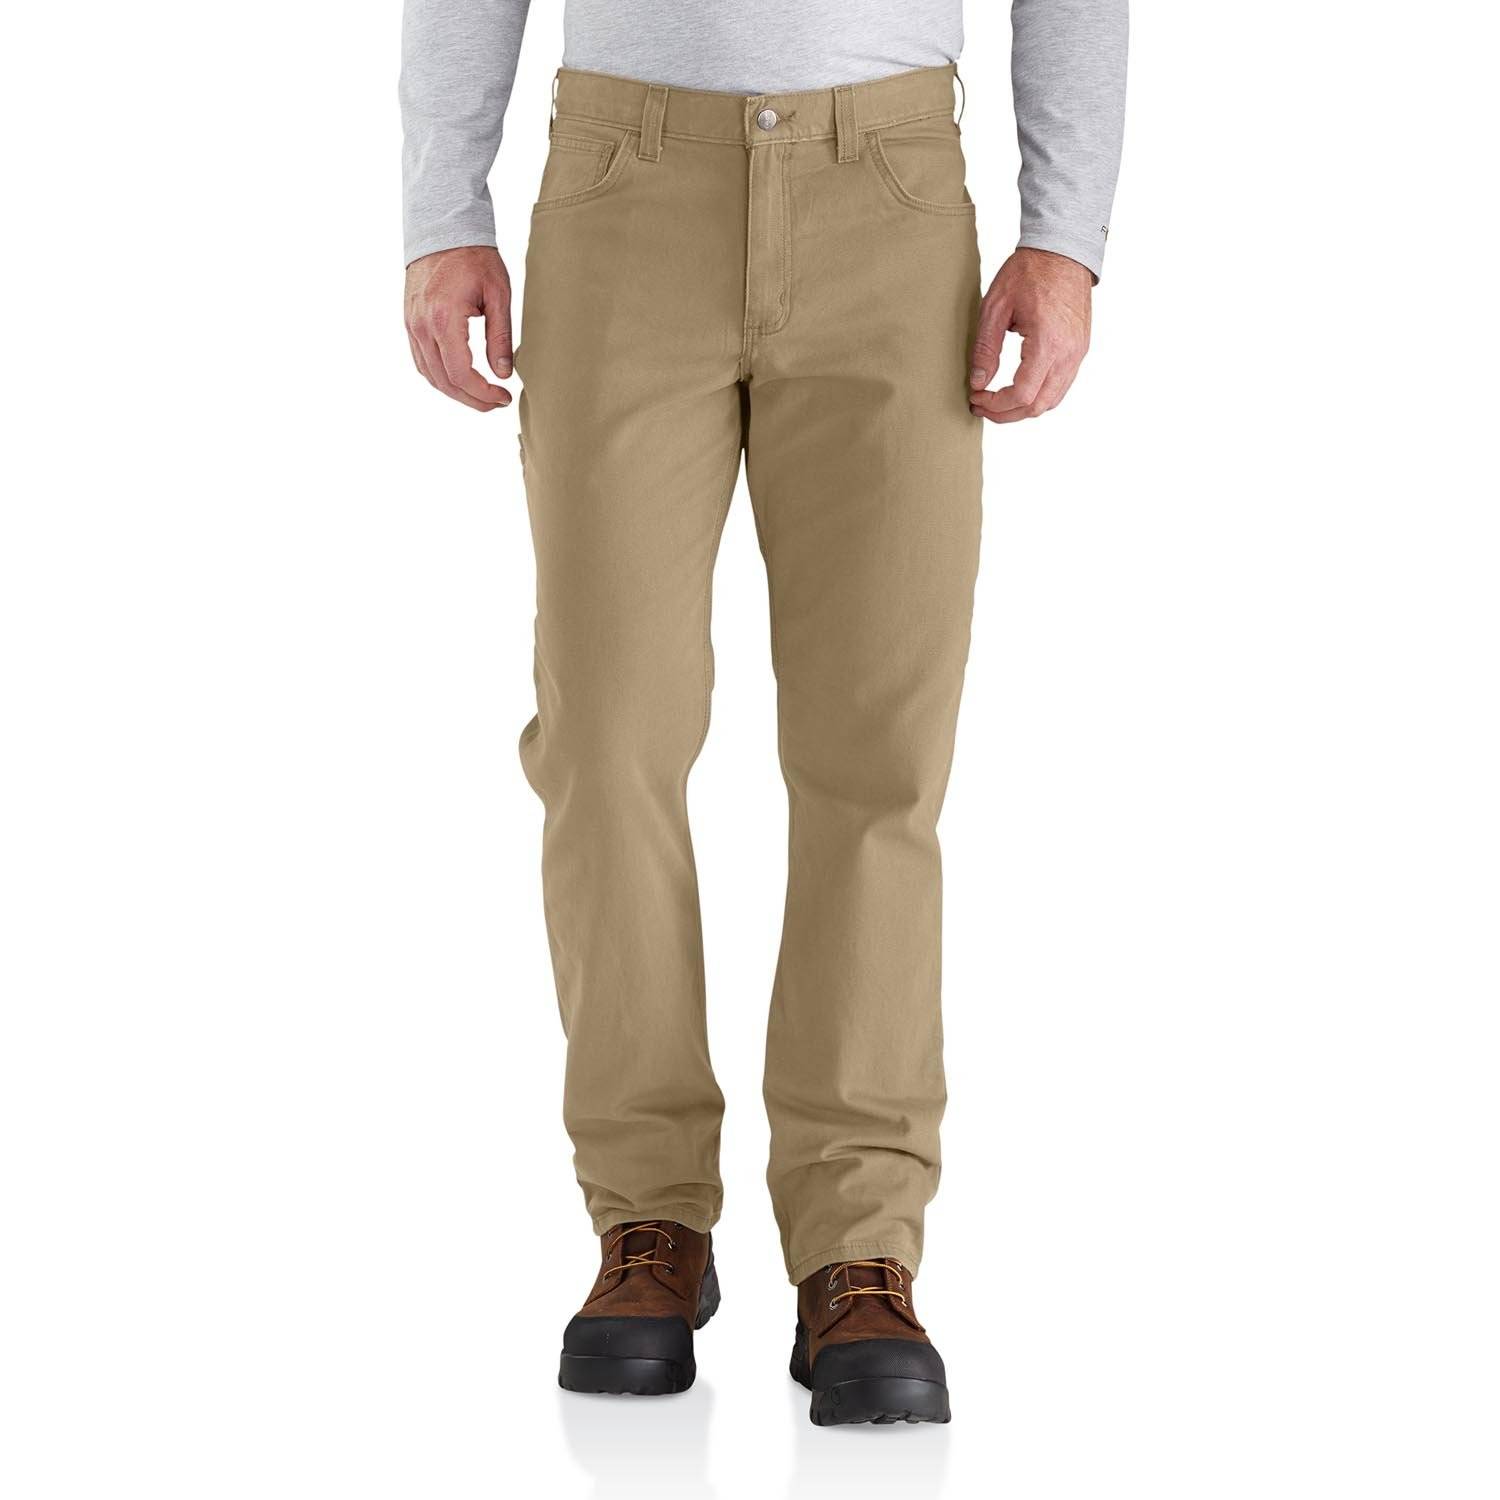 CARHARTT RUGGED FLEX RELAXED FIT CANVAS 5-POCKET WORK PANTS